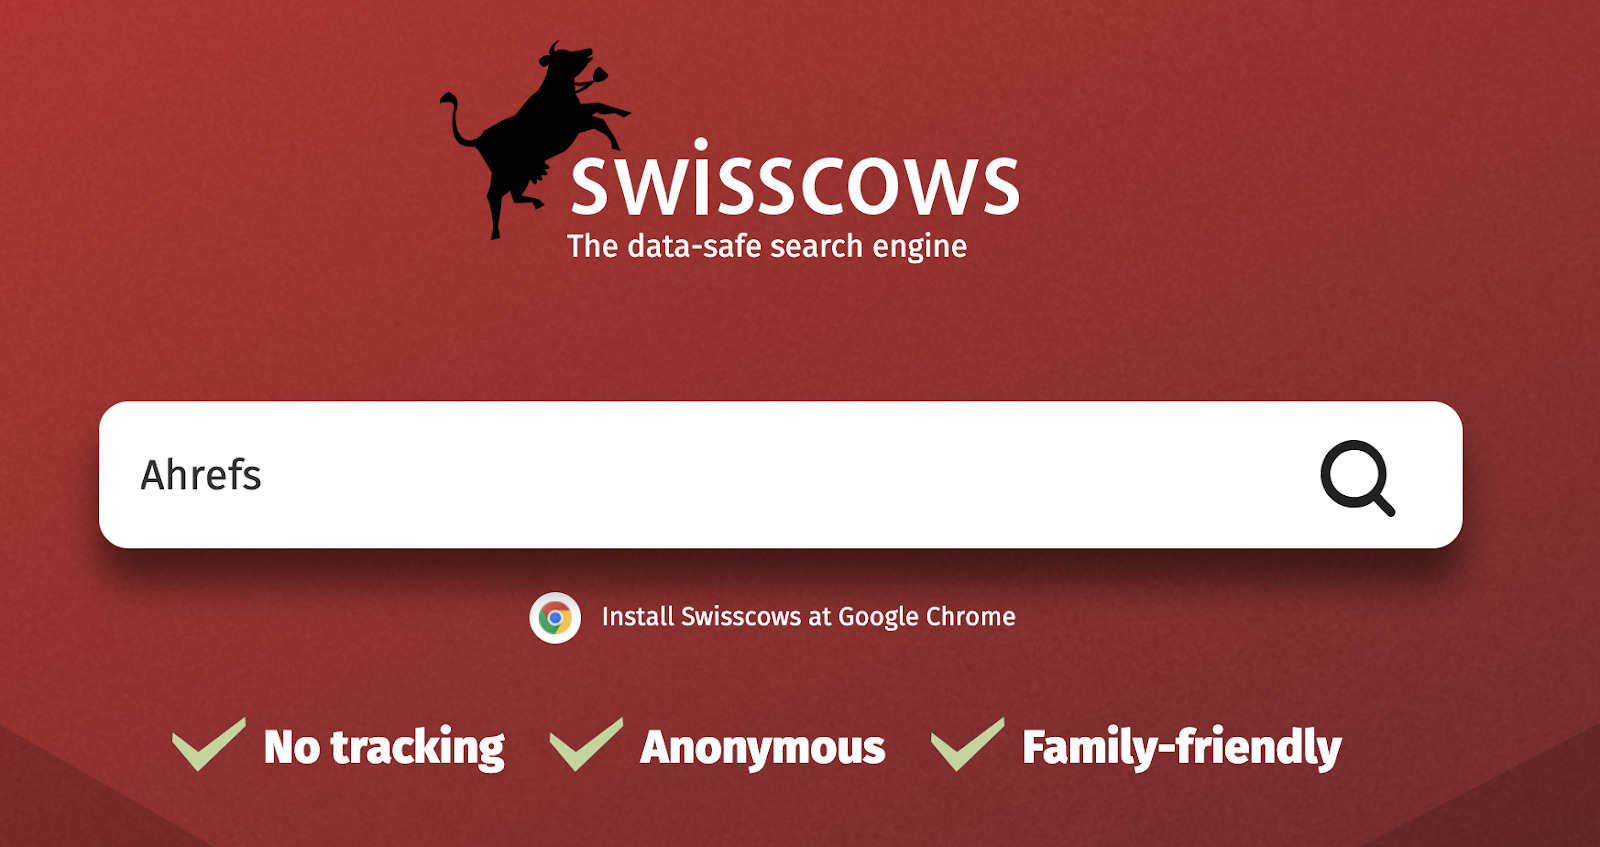 Swisscows' homepage. Search term "Ahrefs" in text field